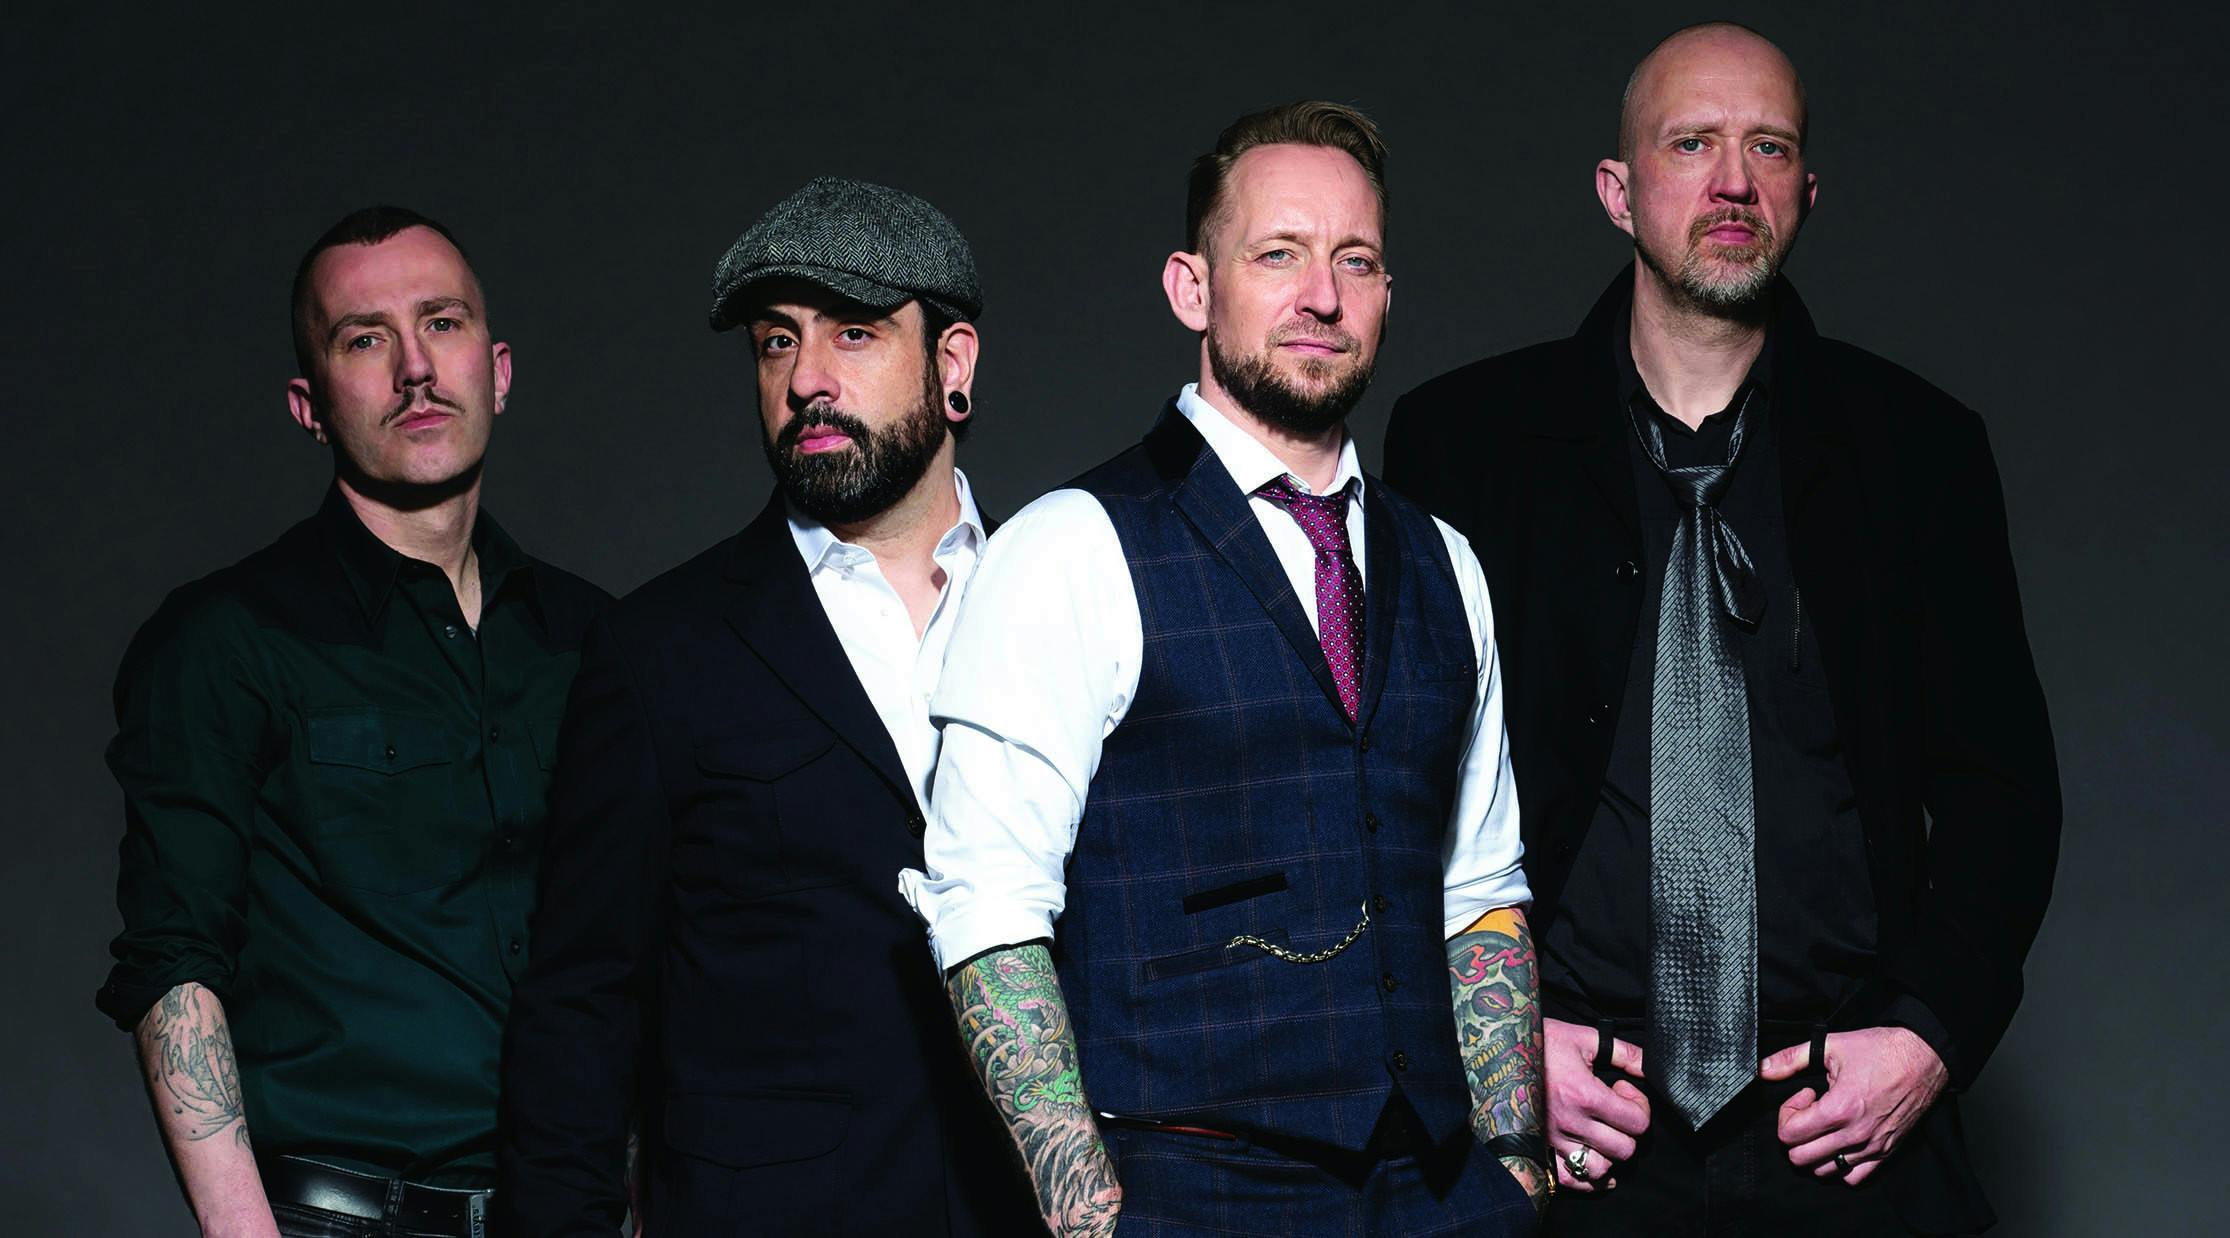 Volbeat Have The Most #1 Mainstream Rock Songs Of Any European Band